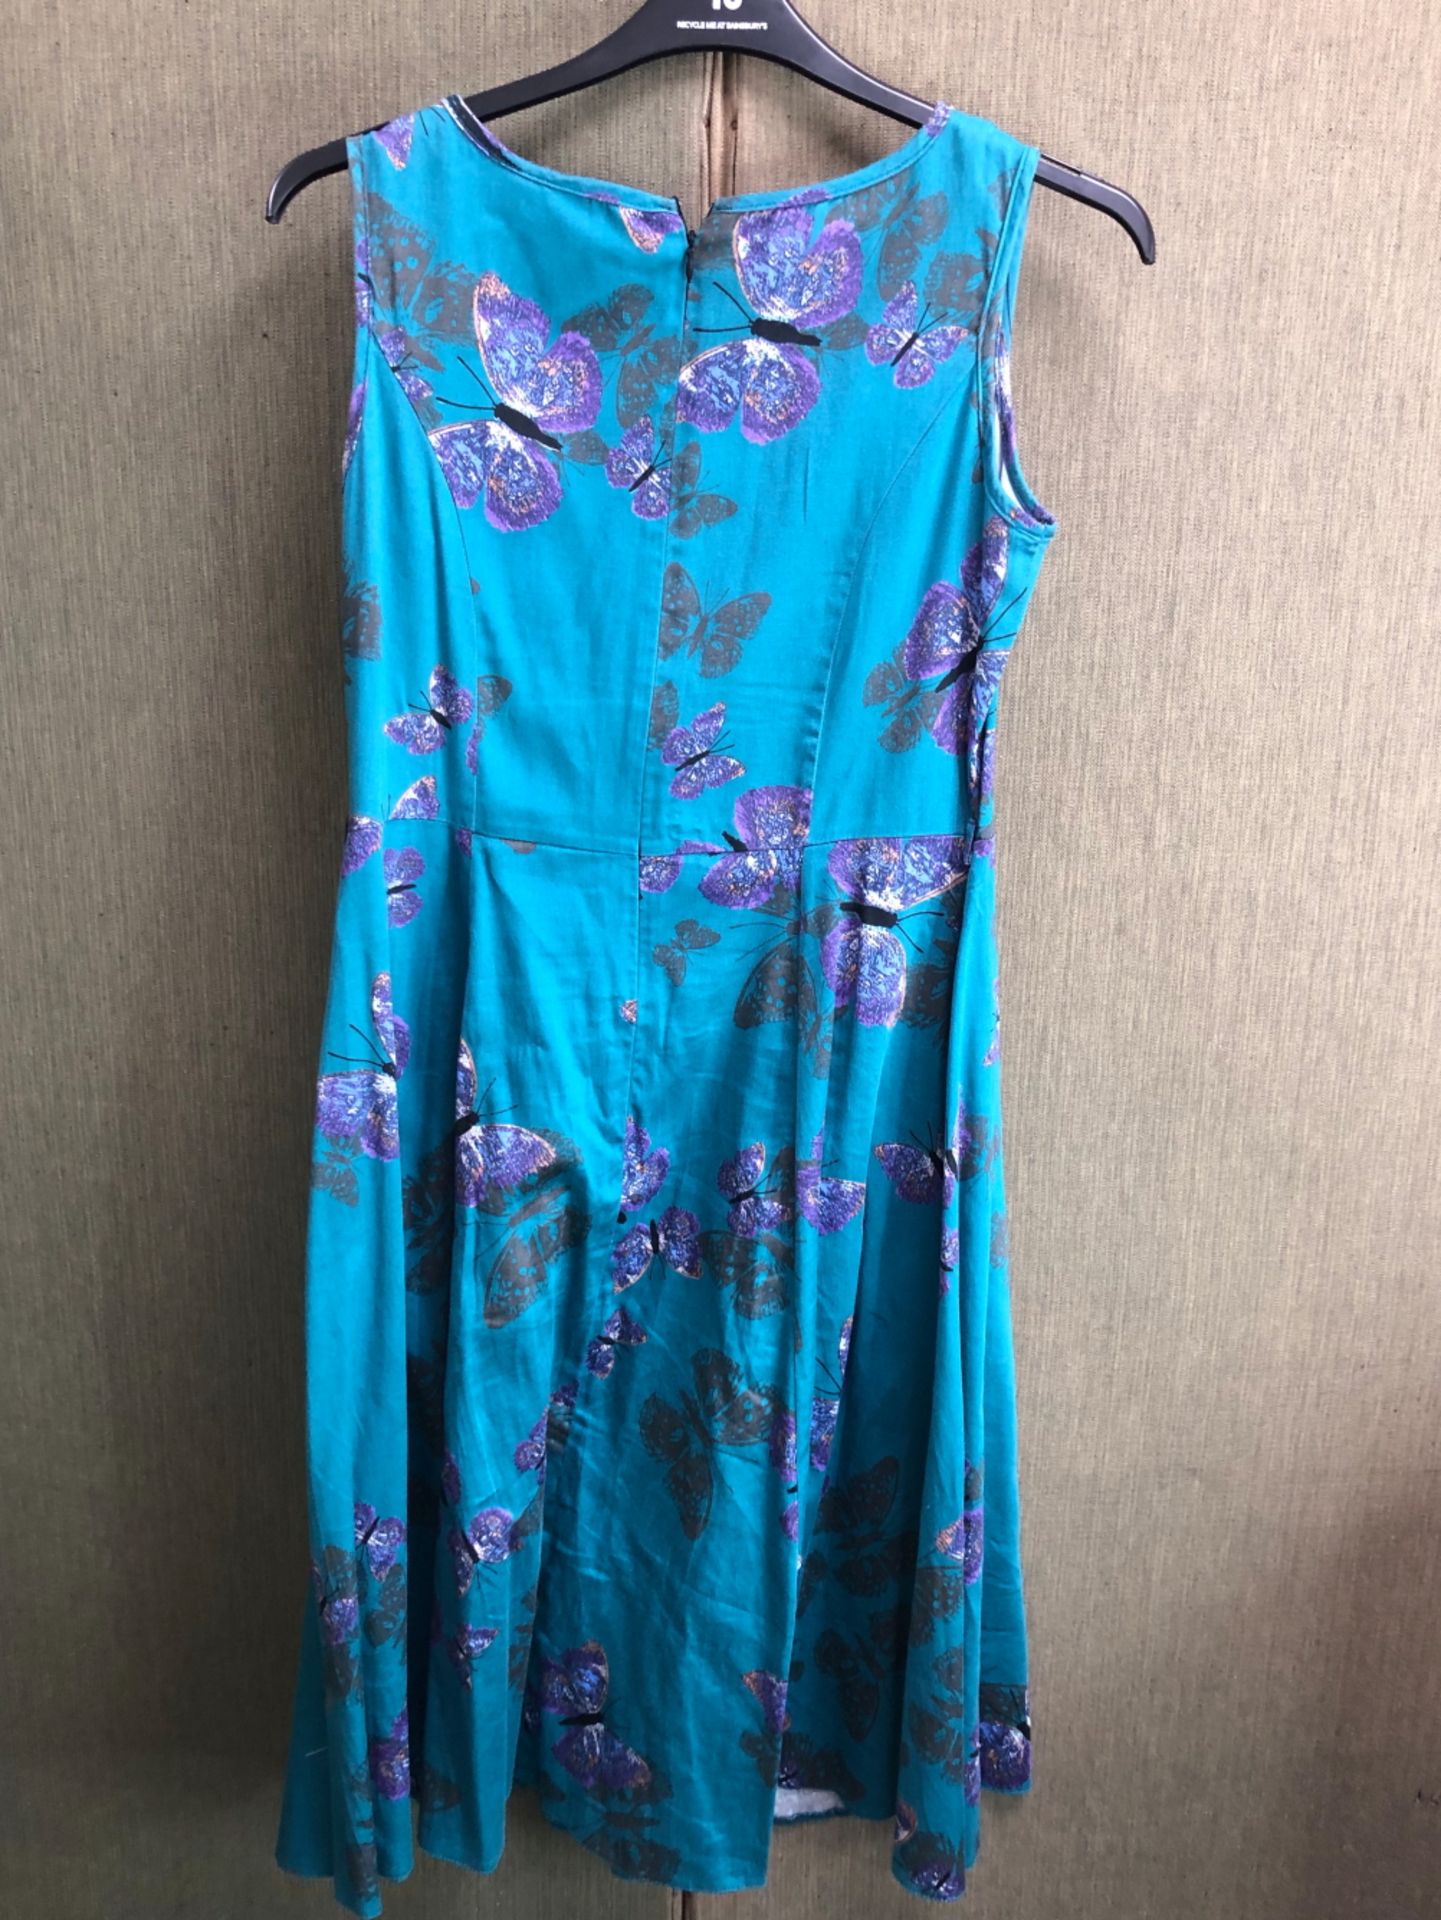 A LADY VINTAGE LONDON GREEN DRESS WITH PURPLE BUTTERFLIES SIZE 14 TOGETHER WITH LIQUORISH NAVY - Image 14 of 14